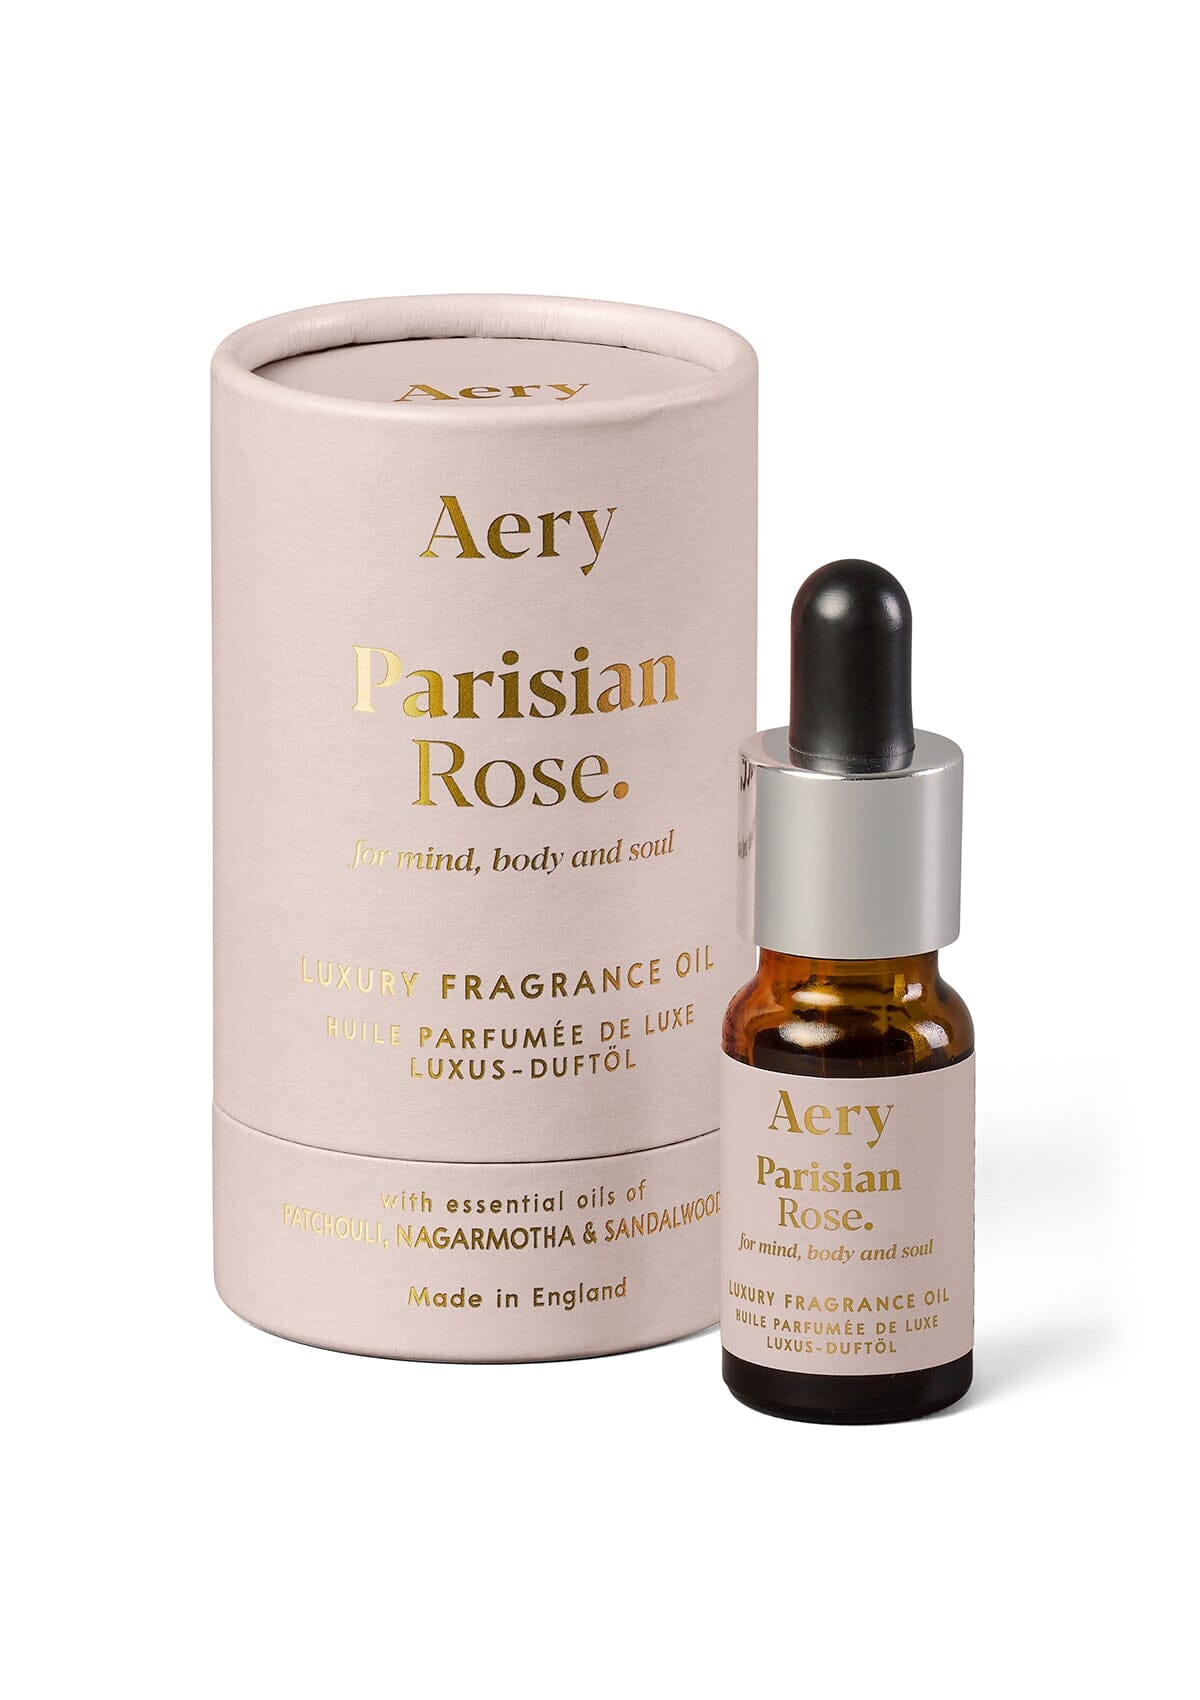 Pink Parisian Rose fragrance oil displayed next to product packaging by Aery on white background 